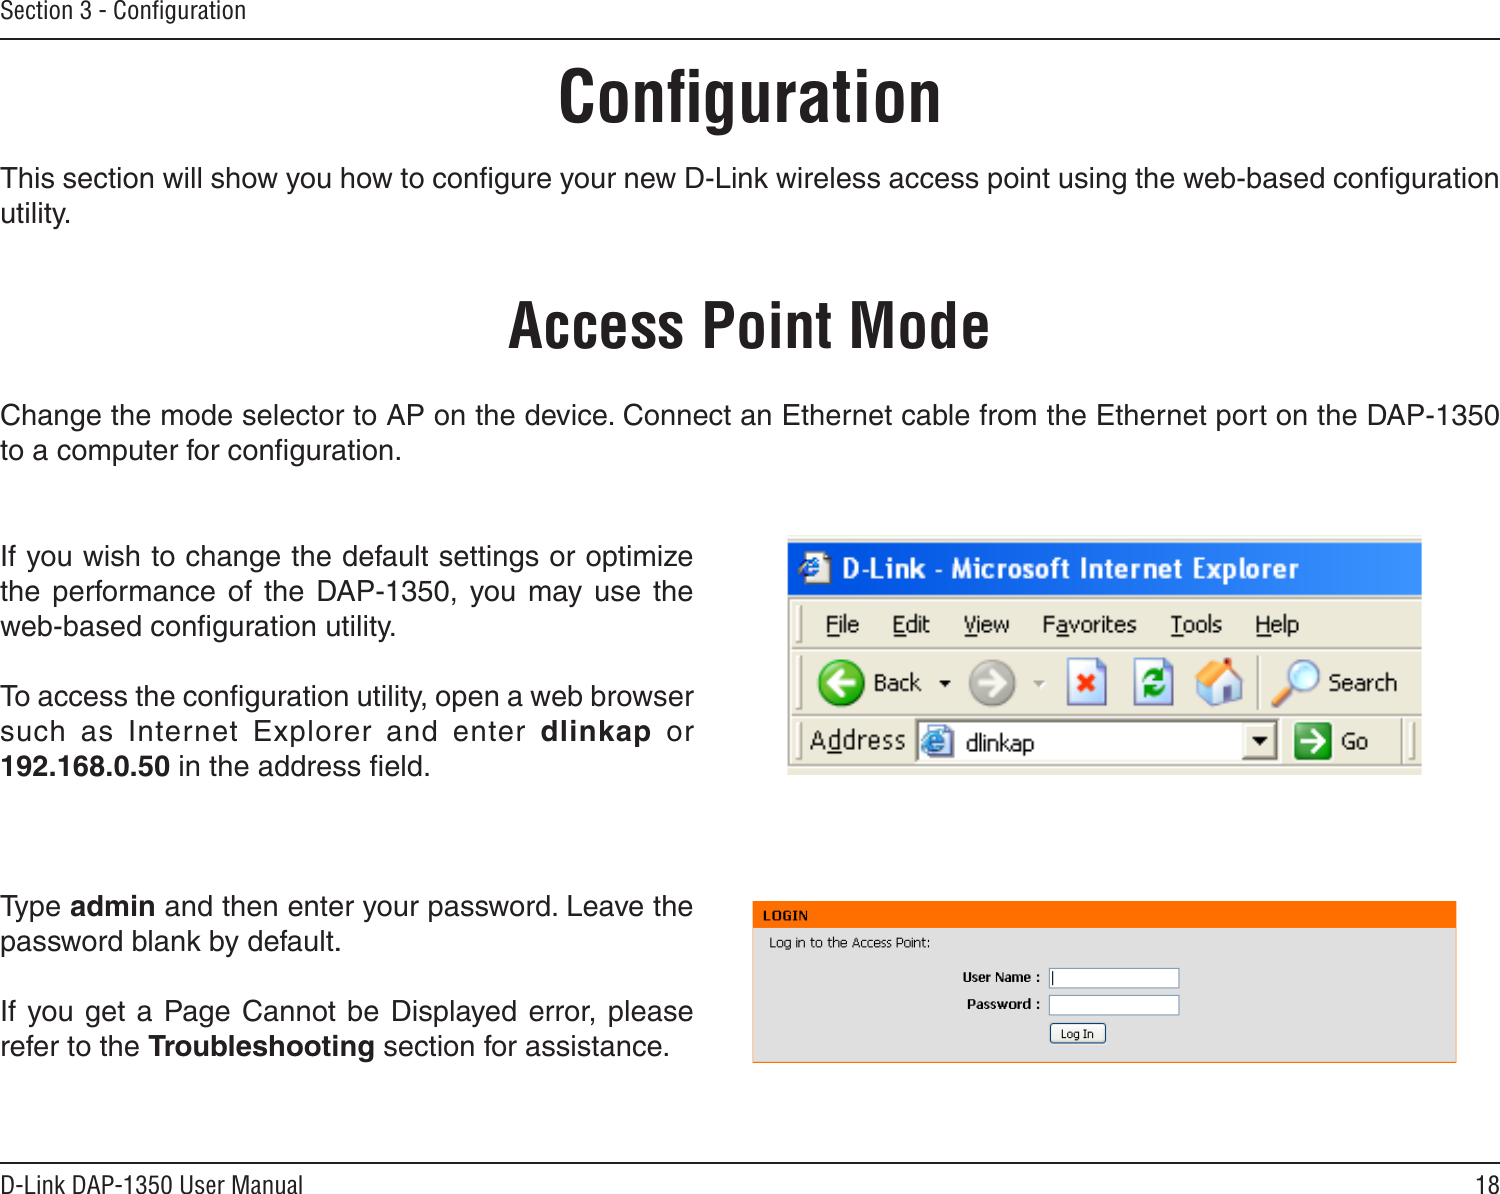 18D-Link DAP-1350 User ManualSection 3 - ConﬁgurationConﬁgurationThis section will show you how to conﬁgure your new D-Link wireless access point using the web-based conﬁguration utility.Access Point ModeIf you wish to change the default settings or optimize the  performance  of  the  DAP-1350,  you  may  use  the web-based conﬁguration utility.To access the conﬁguration utility, open a web browser such  as  Internet  Explorer  and  enter  dlinkap  or 192.168.0.50 in the address ﬁeld.Type admin and then enter your password. Leave the password blank by default..If you get a Page Cannot be Displayed error, please refer to the Troubleshooting section for assistance.Change the mode selector to AP on the device. Connect an Ethernet cable from the Ethernet port on the DAP-1350 to a computer for conﬁguration.